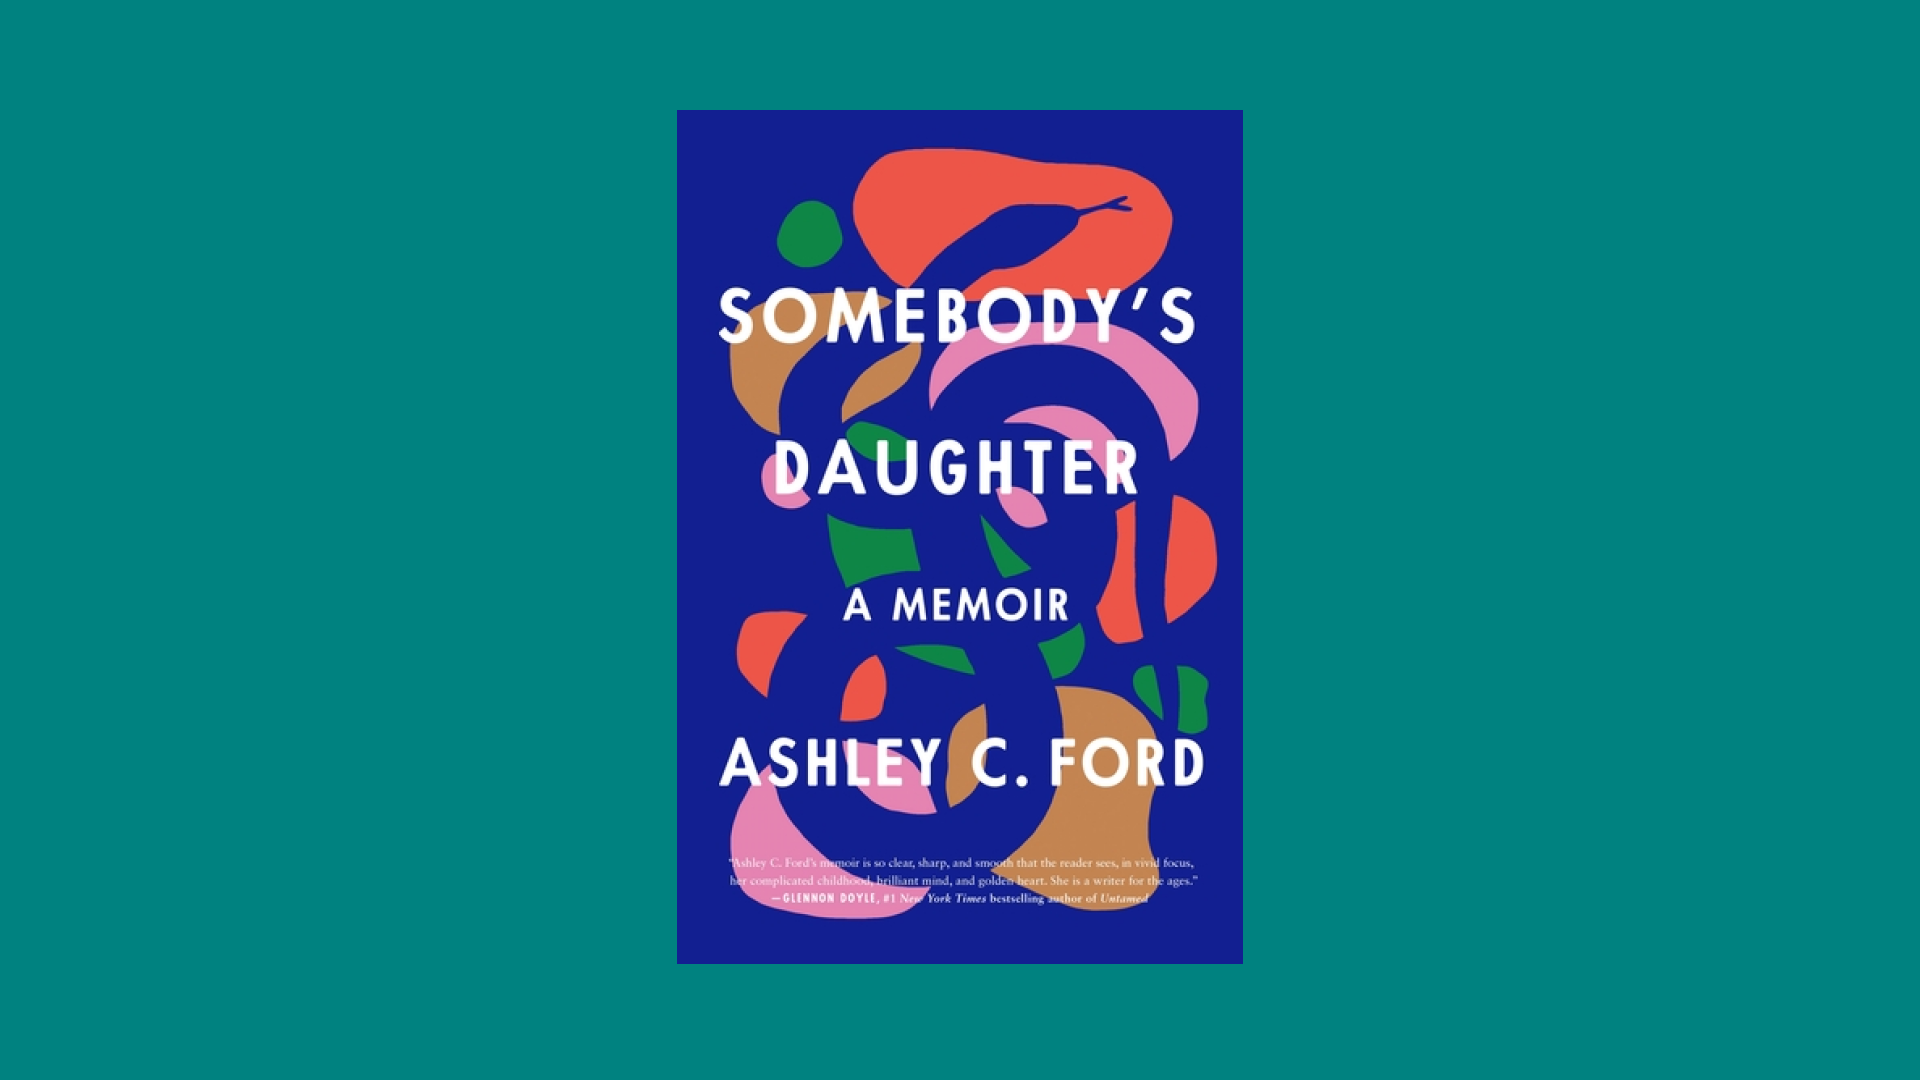 “Somebody’s Daughter” by Ashley C. Ford